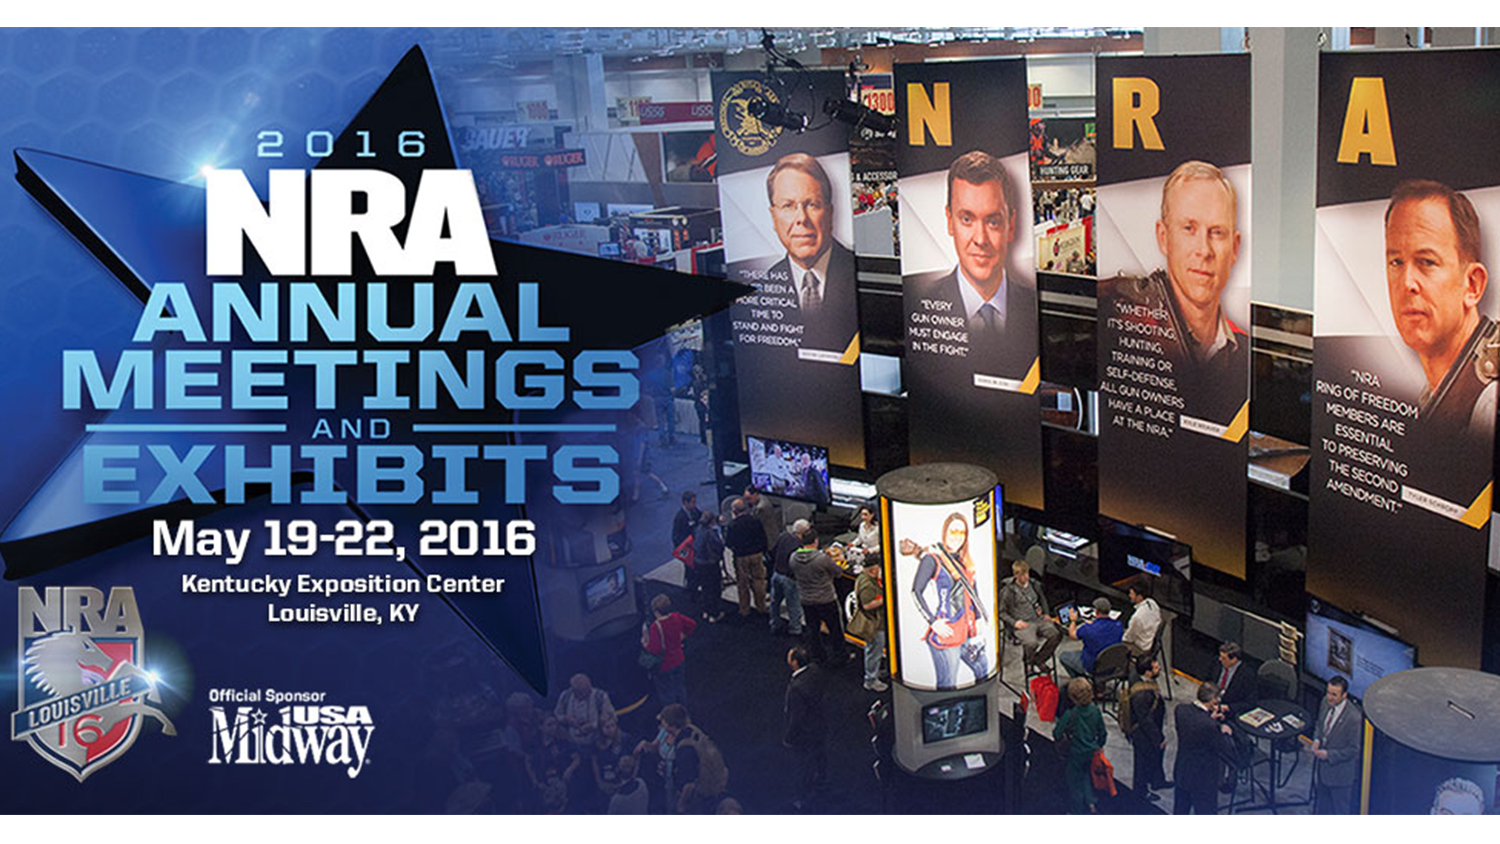 NRA Annual Meeting Events: Thursday May 19th